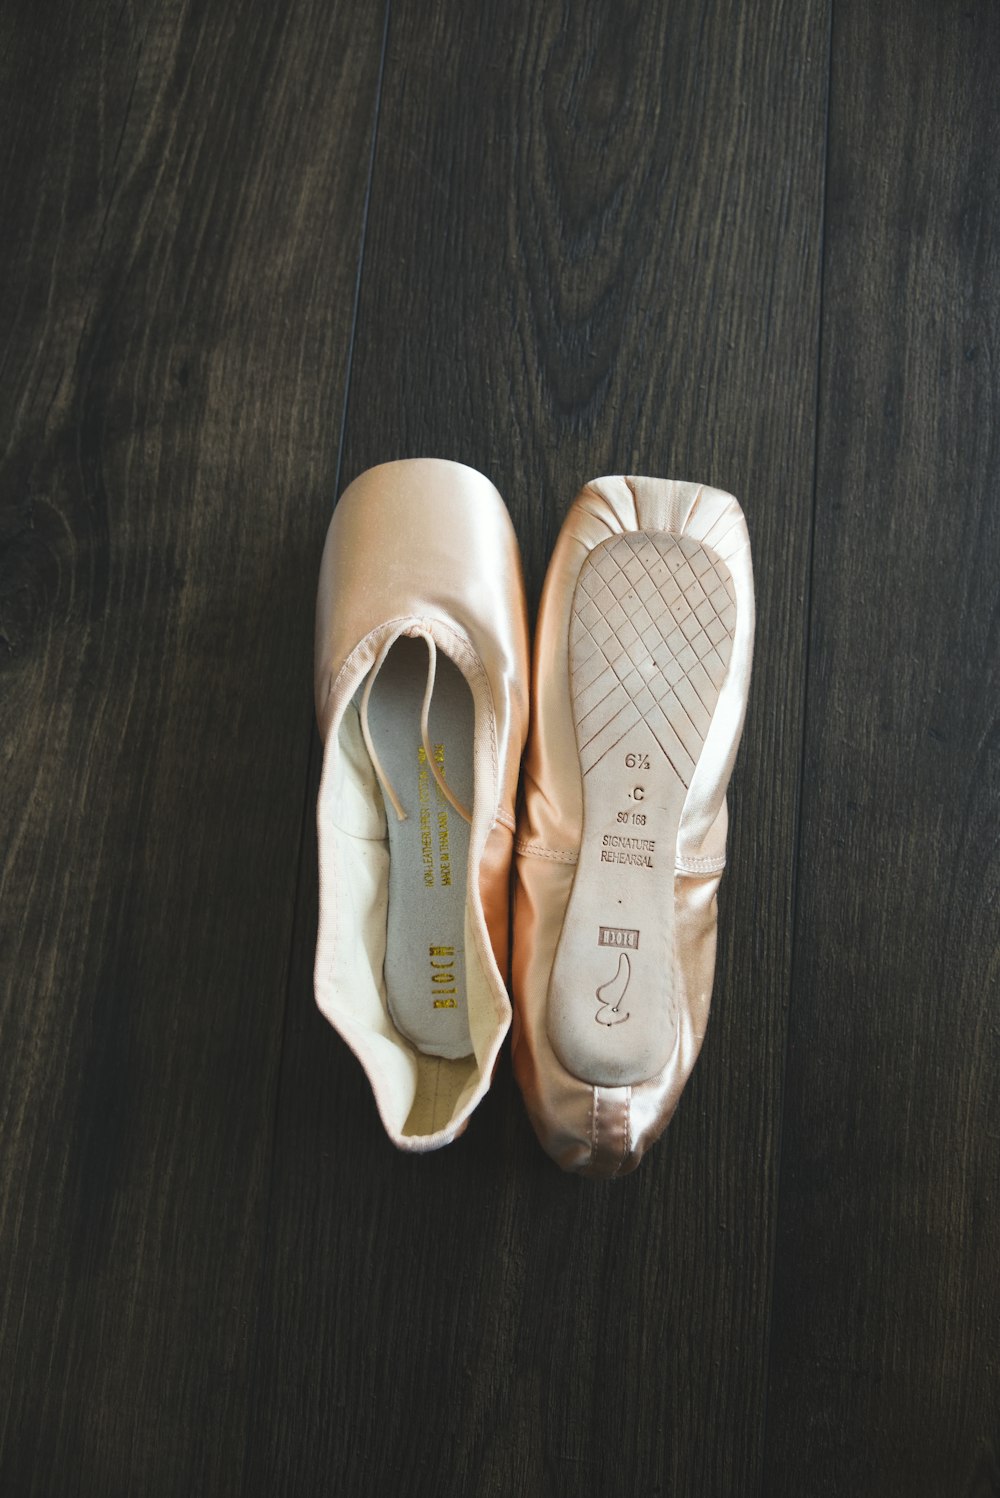 a pair of ballet shoes sitting on top of a wooden floor